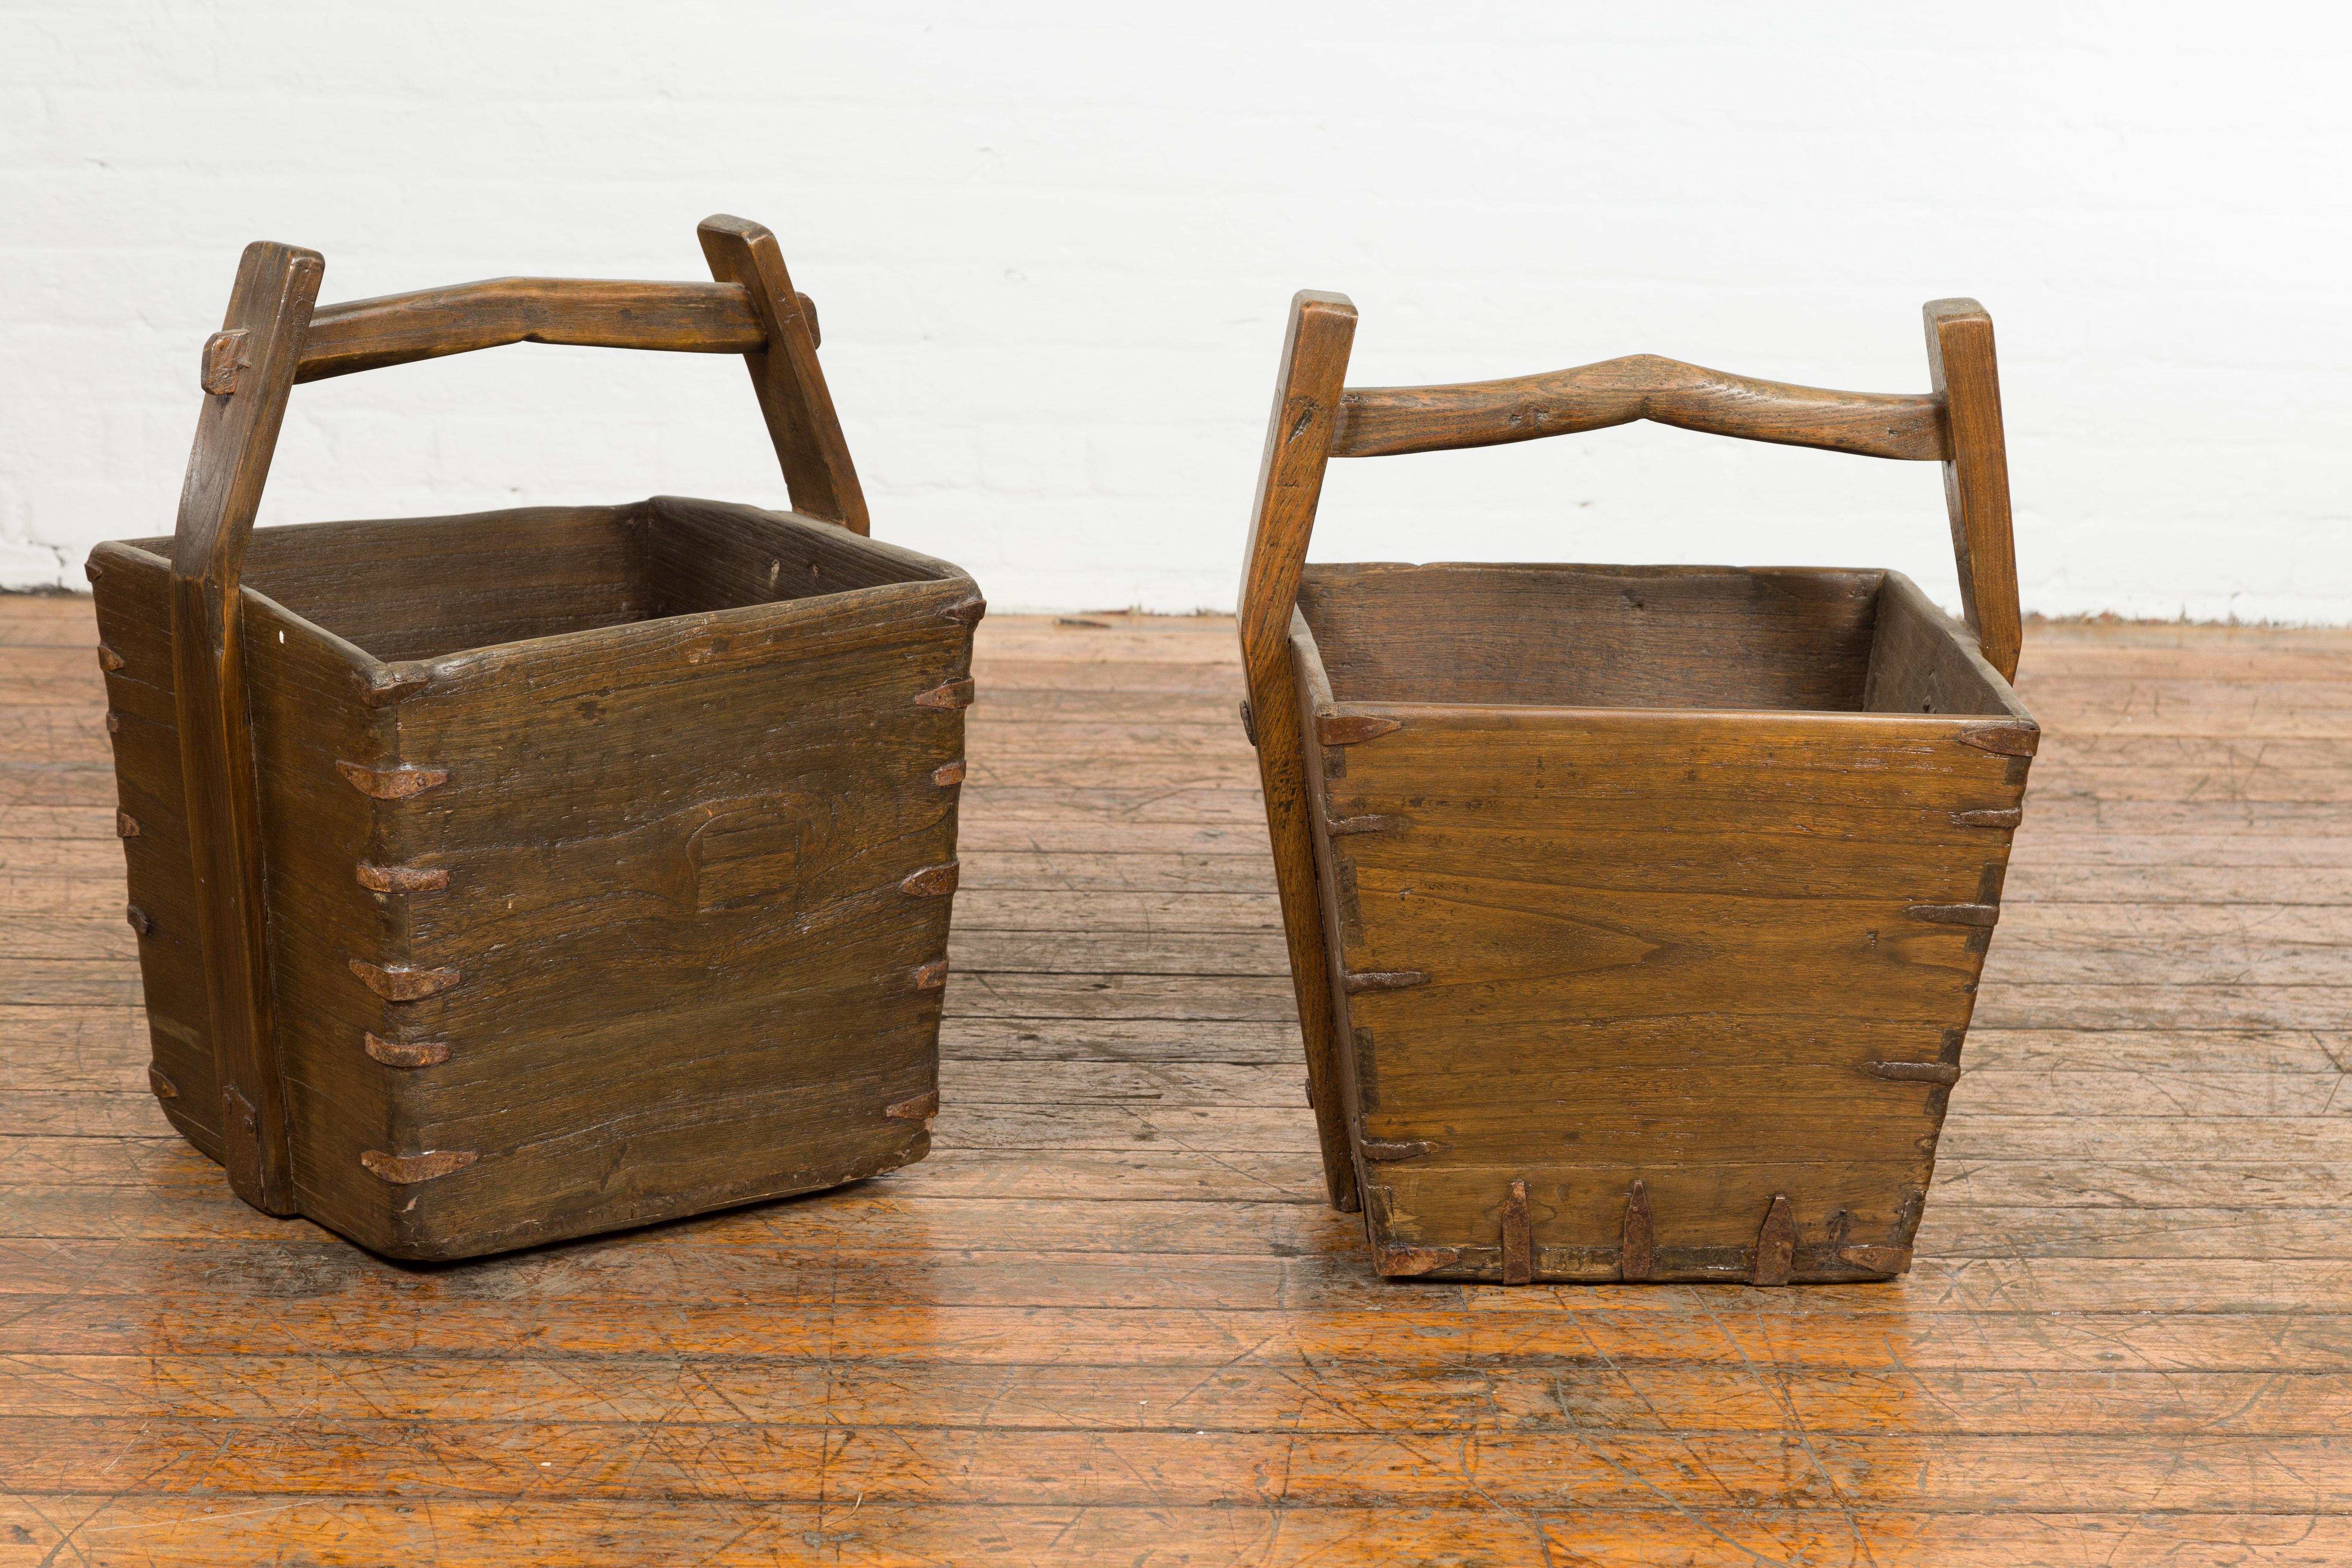 Antique Chinese Wood and Metal Grain Baskets with Carrying Handles, Sold Each For Sale 7